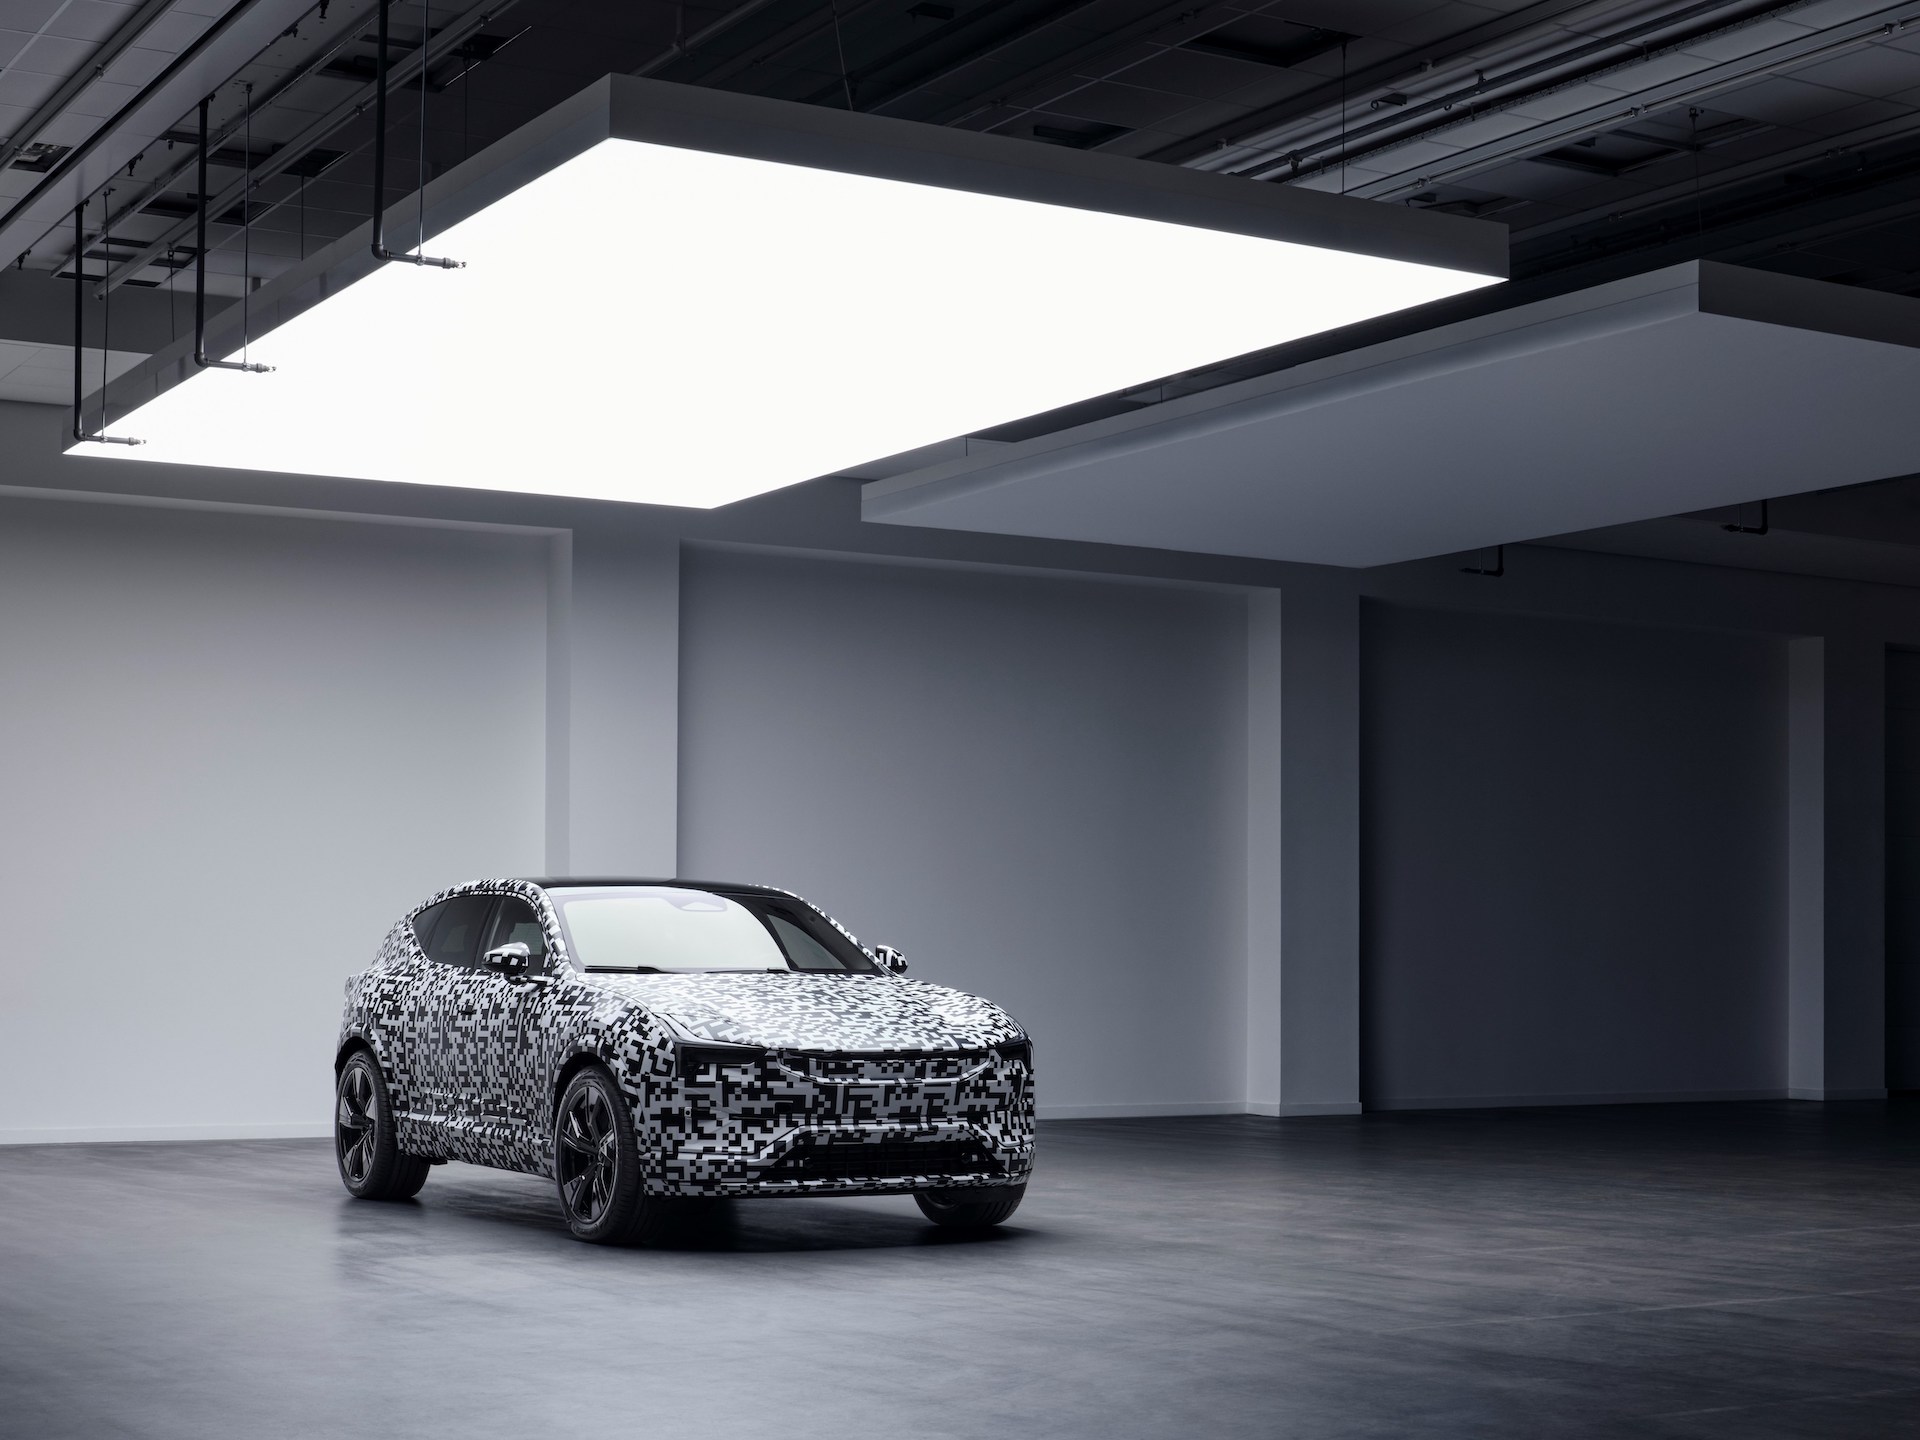 Polestar shows US-made electric SUV, teases two other upcoming EVsPolestar shows US-made electric SUV, teases two other upcoming EVs